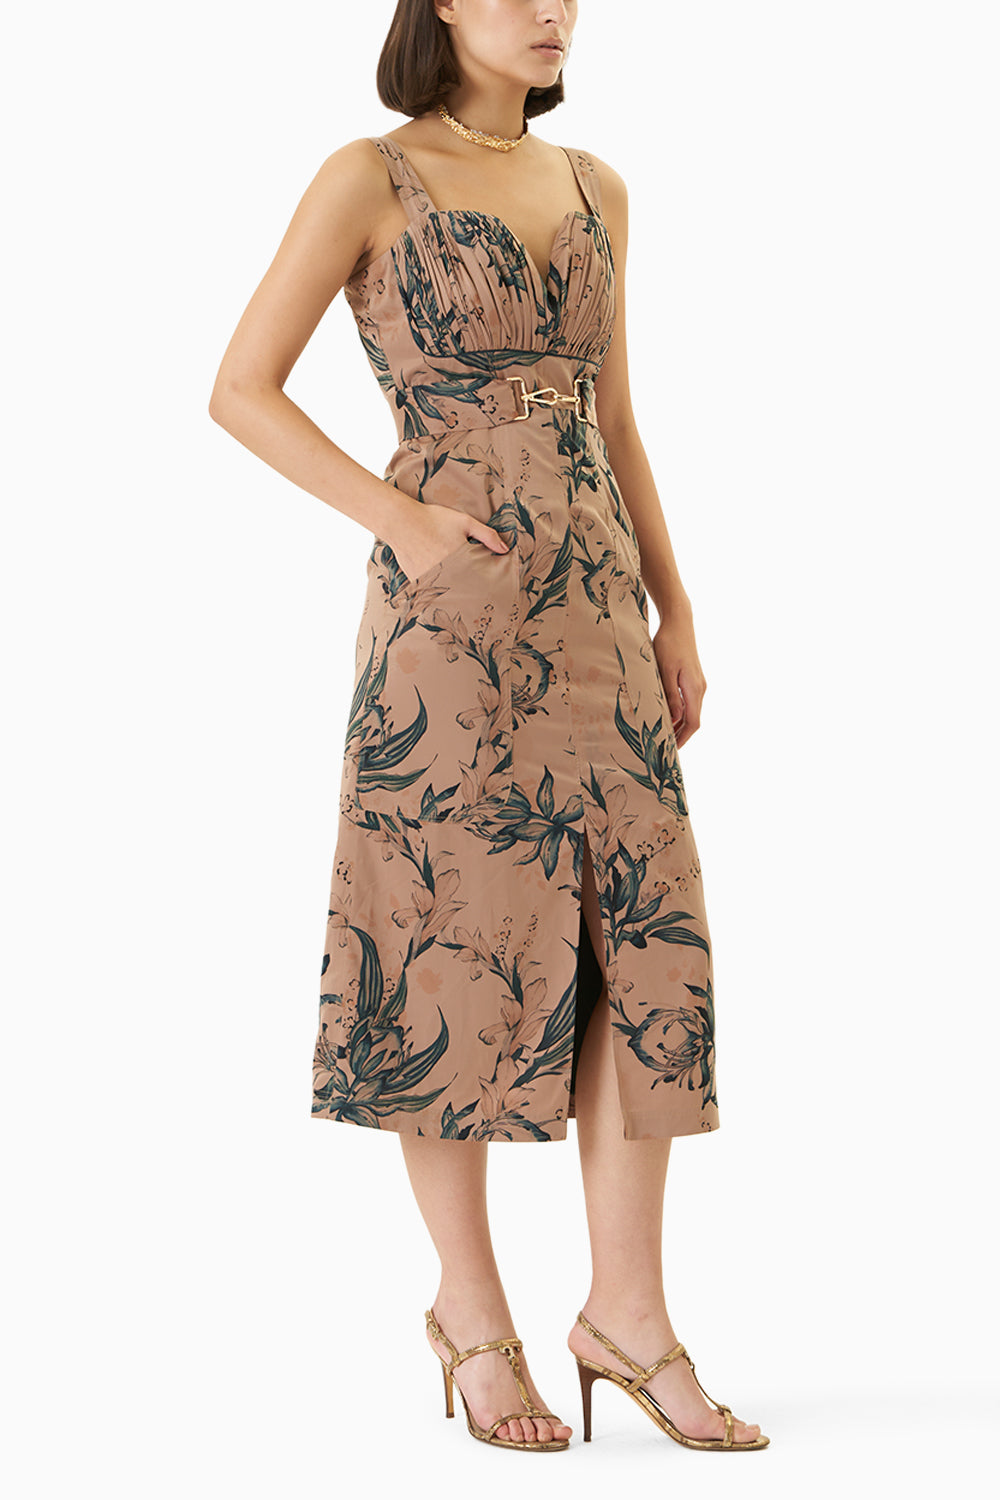 Teal And Fawn Floral Print Ruched Bodice Midi Dress